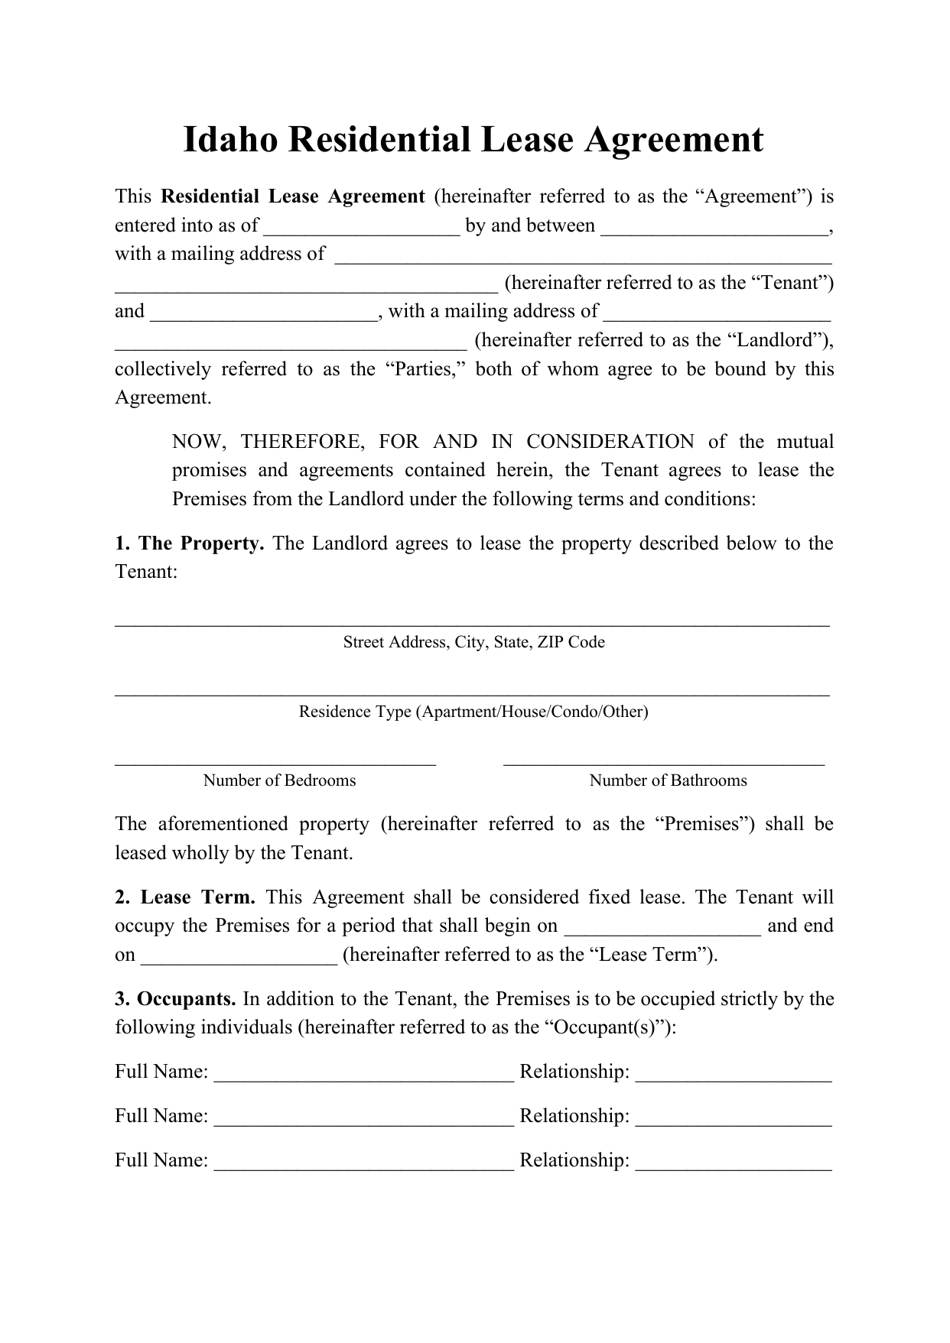 Idaho Residential Lease Agreement Template Fill Out Sign Online and